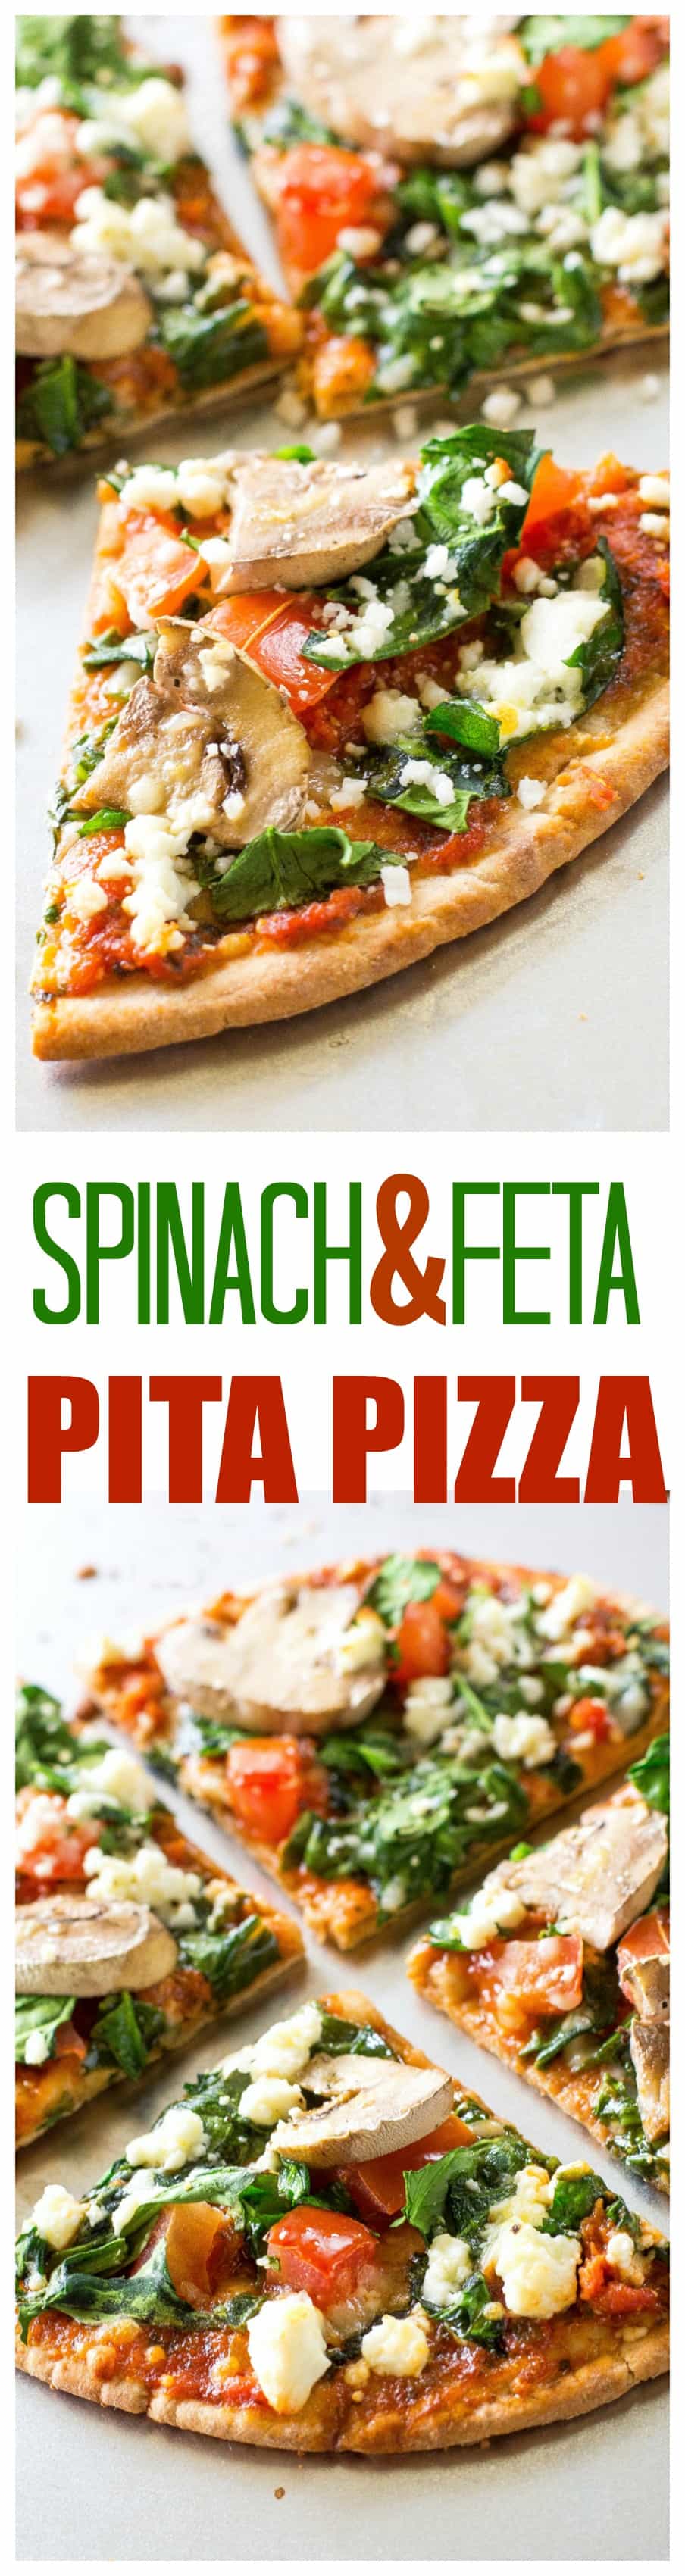 Spinach and Feta Pita Pizzas - a great appetizer or even filling enough for a meal. Only 350 calories per pizza. #healthy #spinach #feta #pita #pizza #dinner #appetizer #recipe